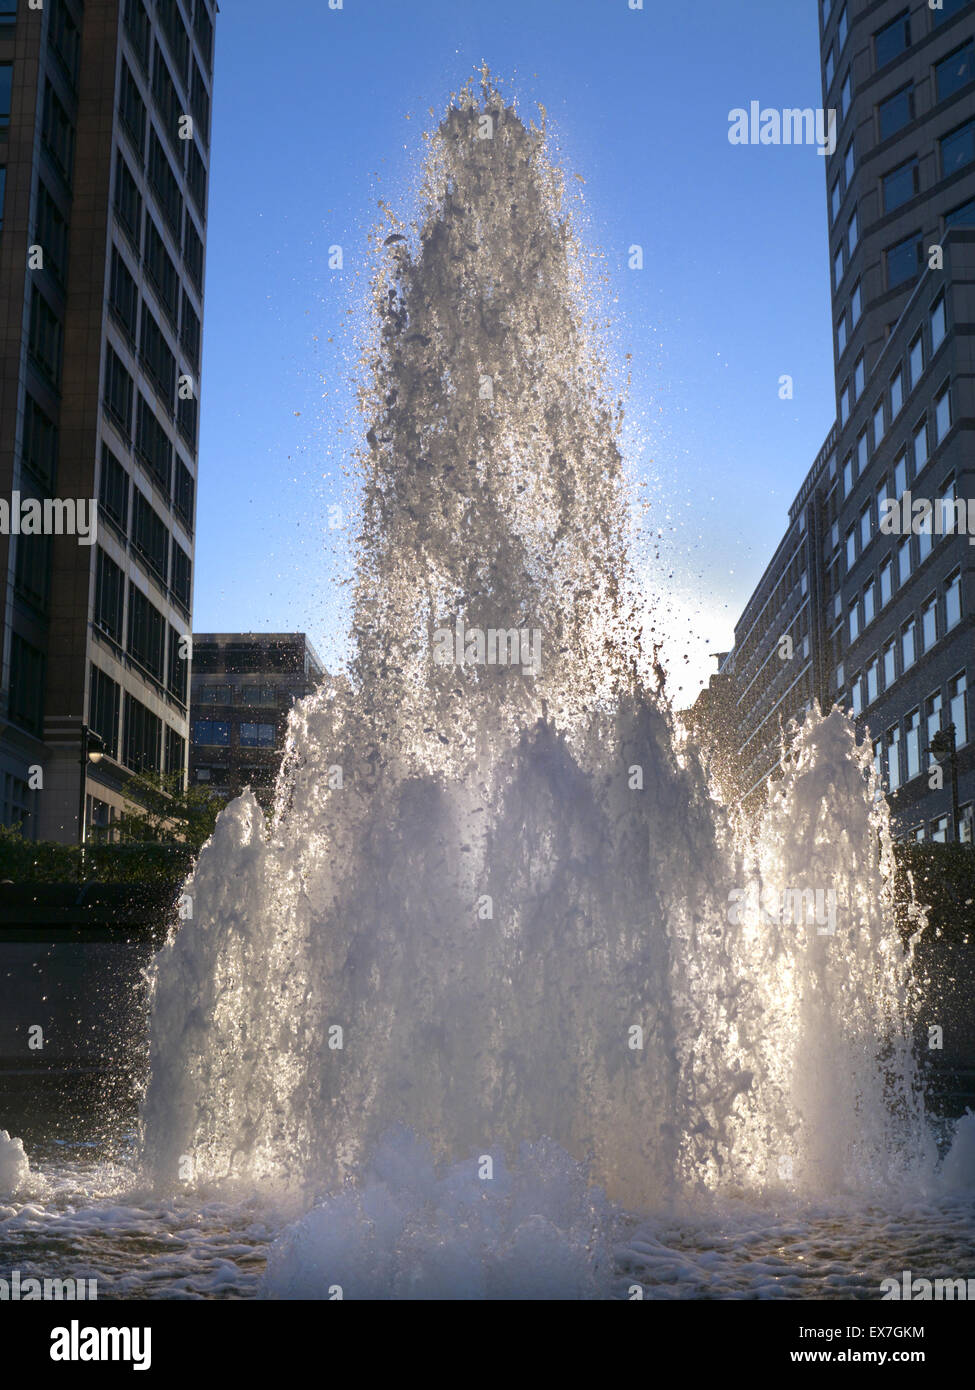 Fountains in Cabot Square said to represent money flowing like water.... Canary Wharf London financial district Stock Photo